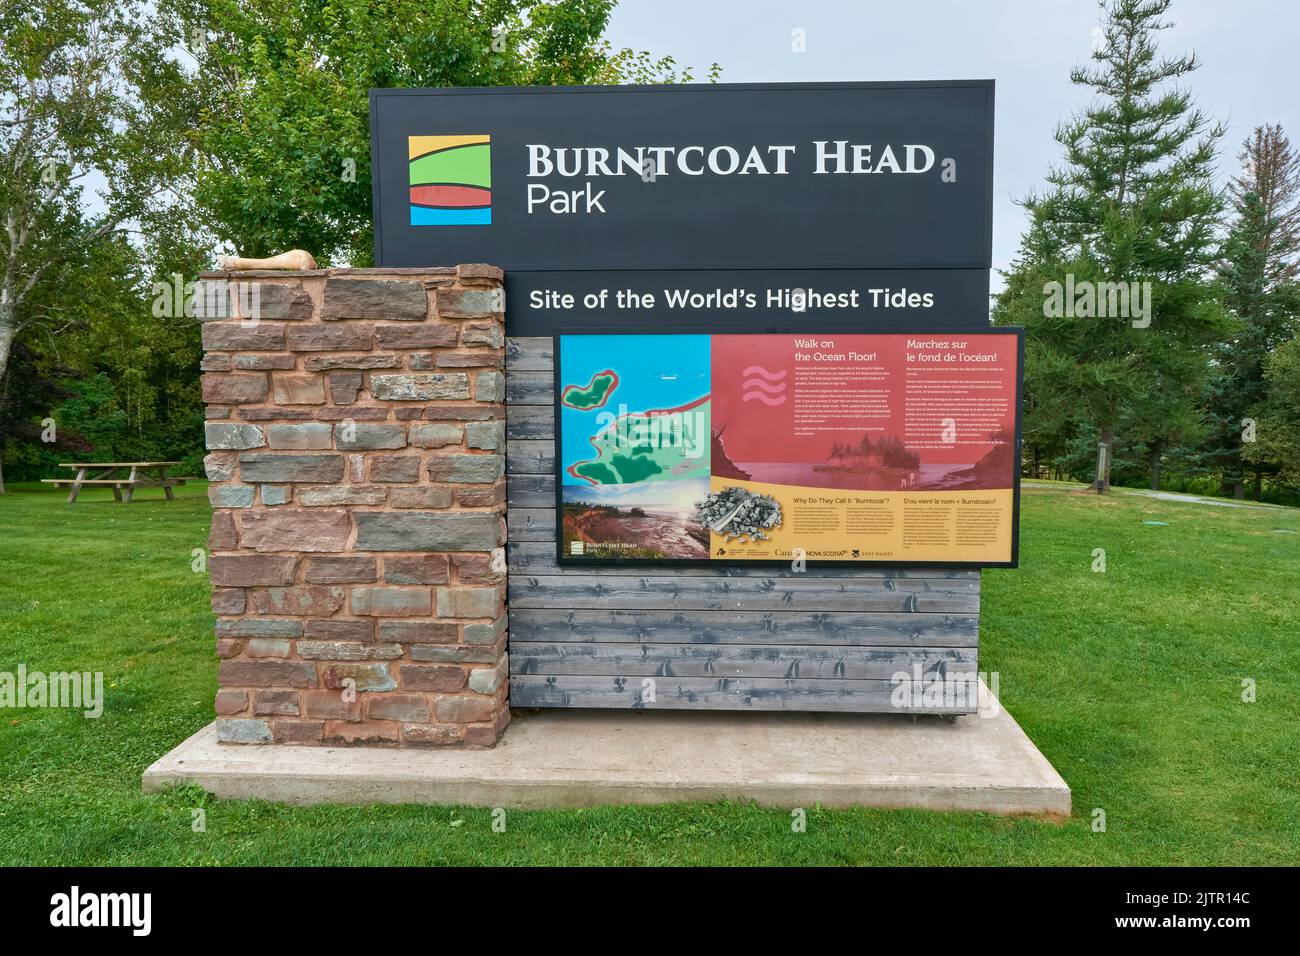 Sign at the entrance to Burntcoat Park Head Park in East Hants near Noel Nova Scotia.  This area on the Bay of Fundy has the worl's highest tides. Stock Photo